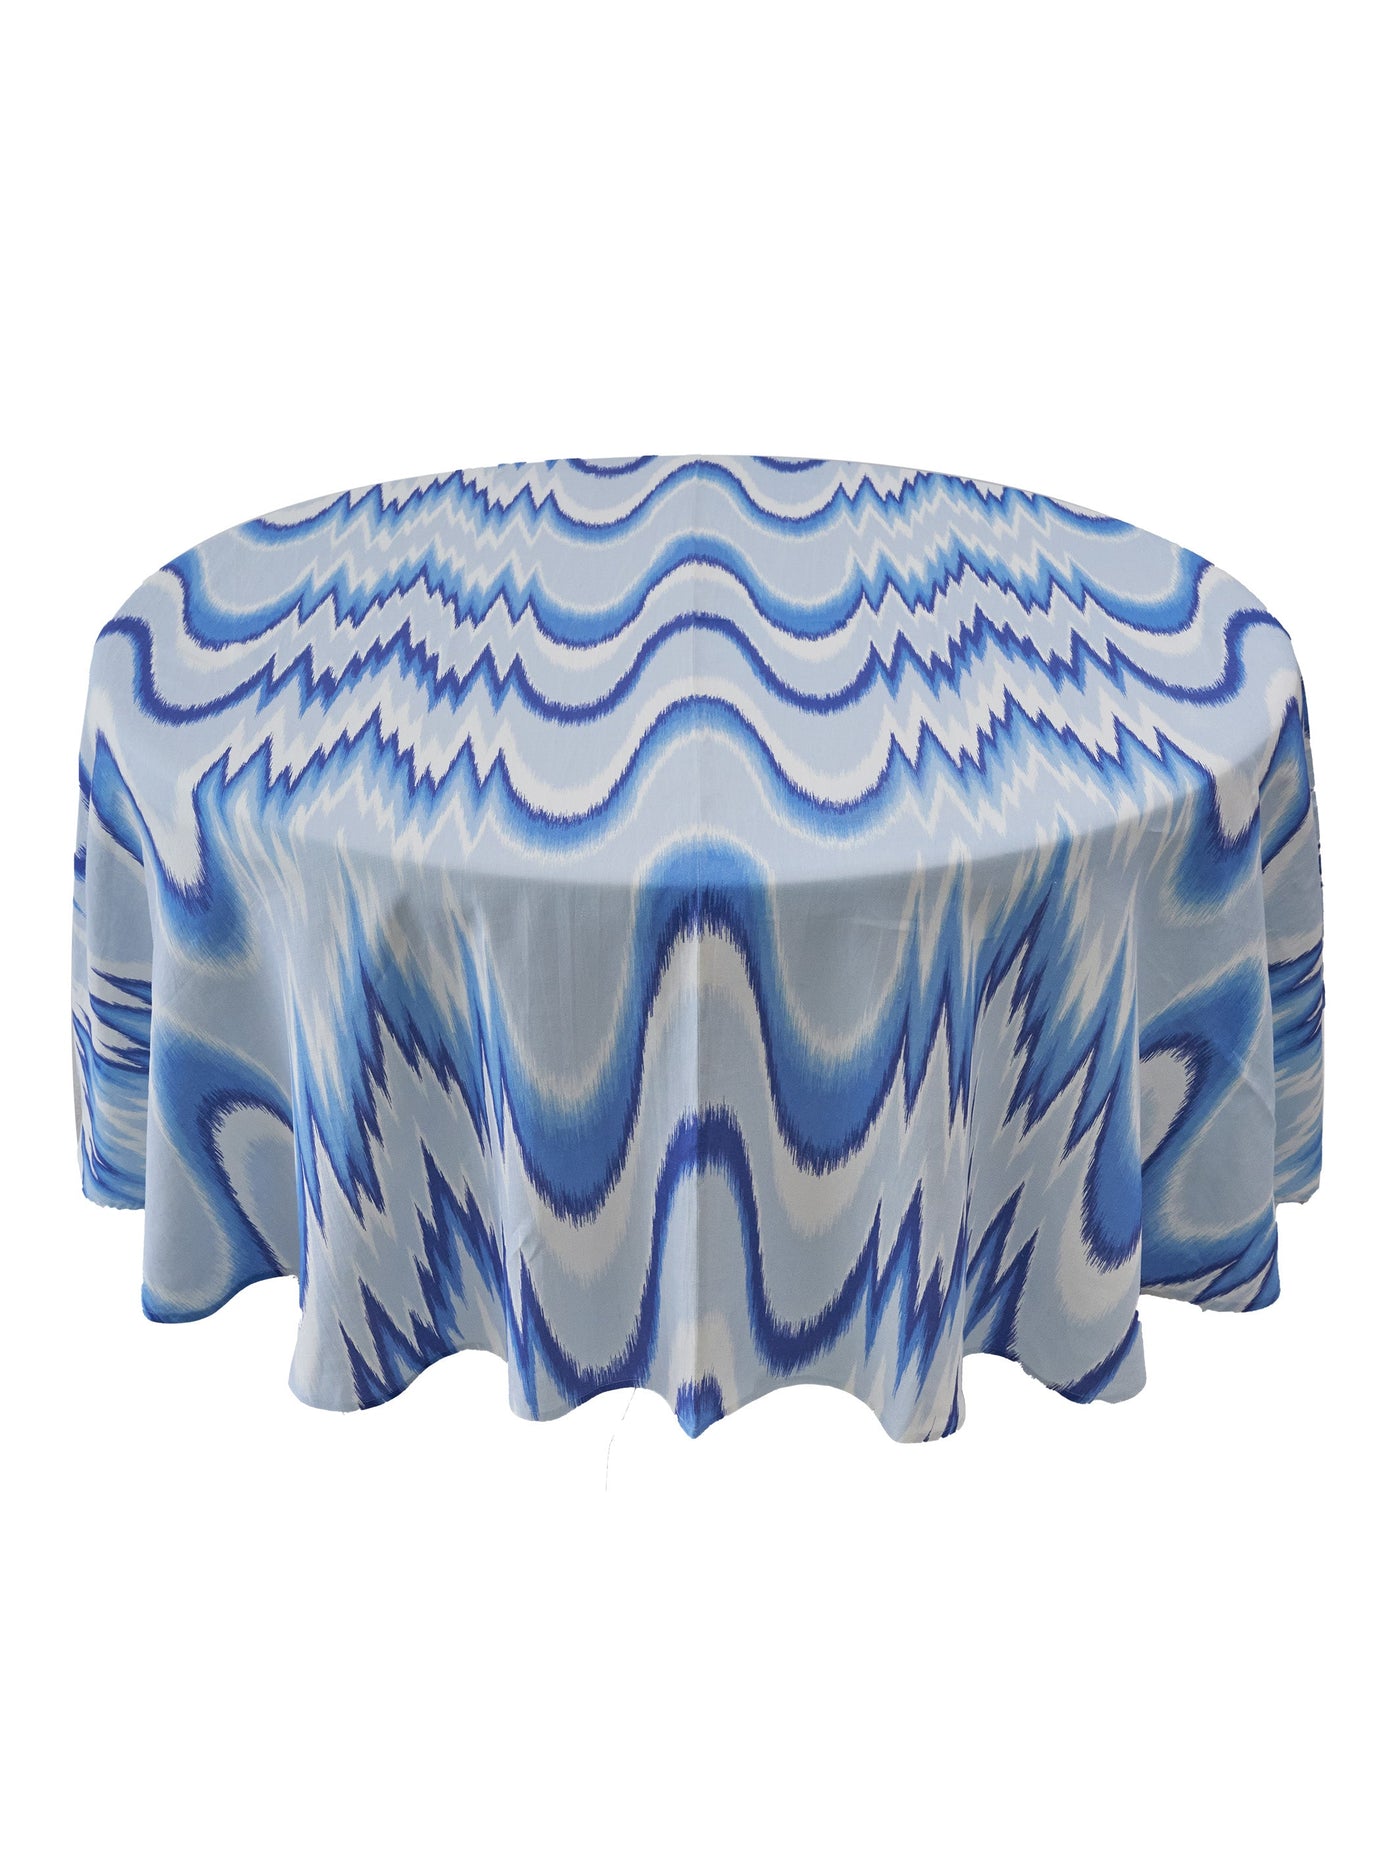 Aurora Flamestitch Round Tablecloth 260 cm in Blue by Permanent Resident